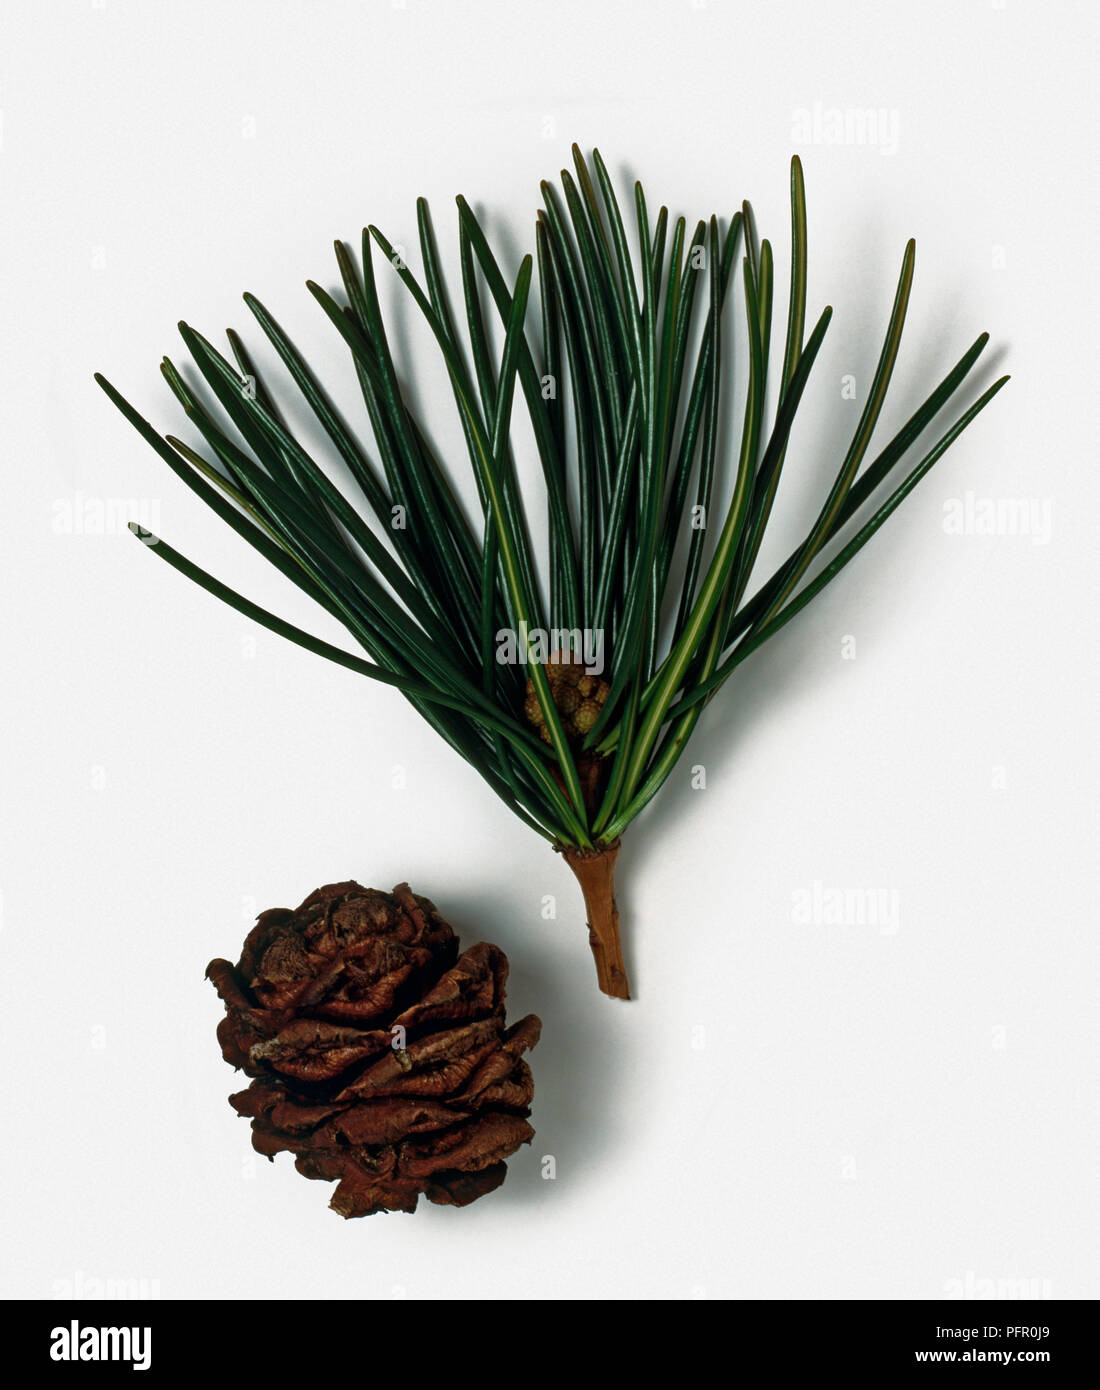 Sciadopitys verticillata (Japanese Umbrella-pine, Koyamak) stem with long green needle-like leaves, male flower cluster, and brown cone Stock Photo